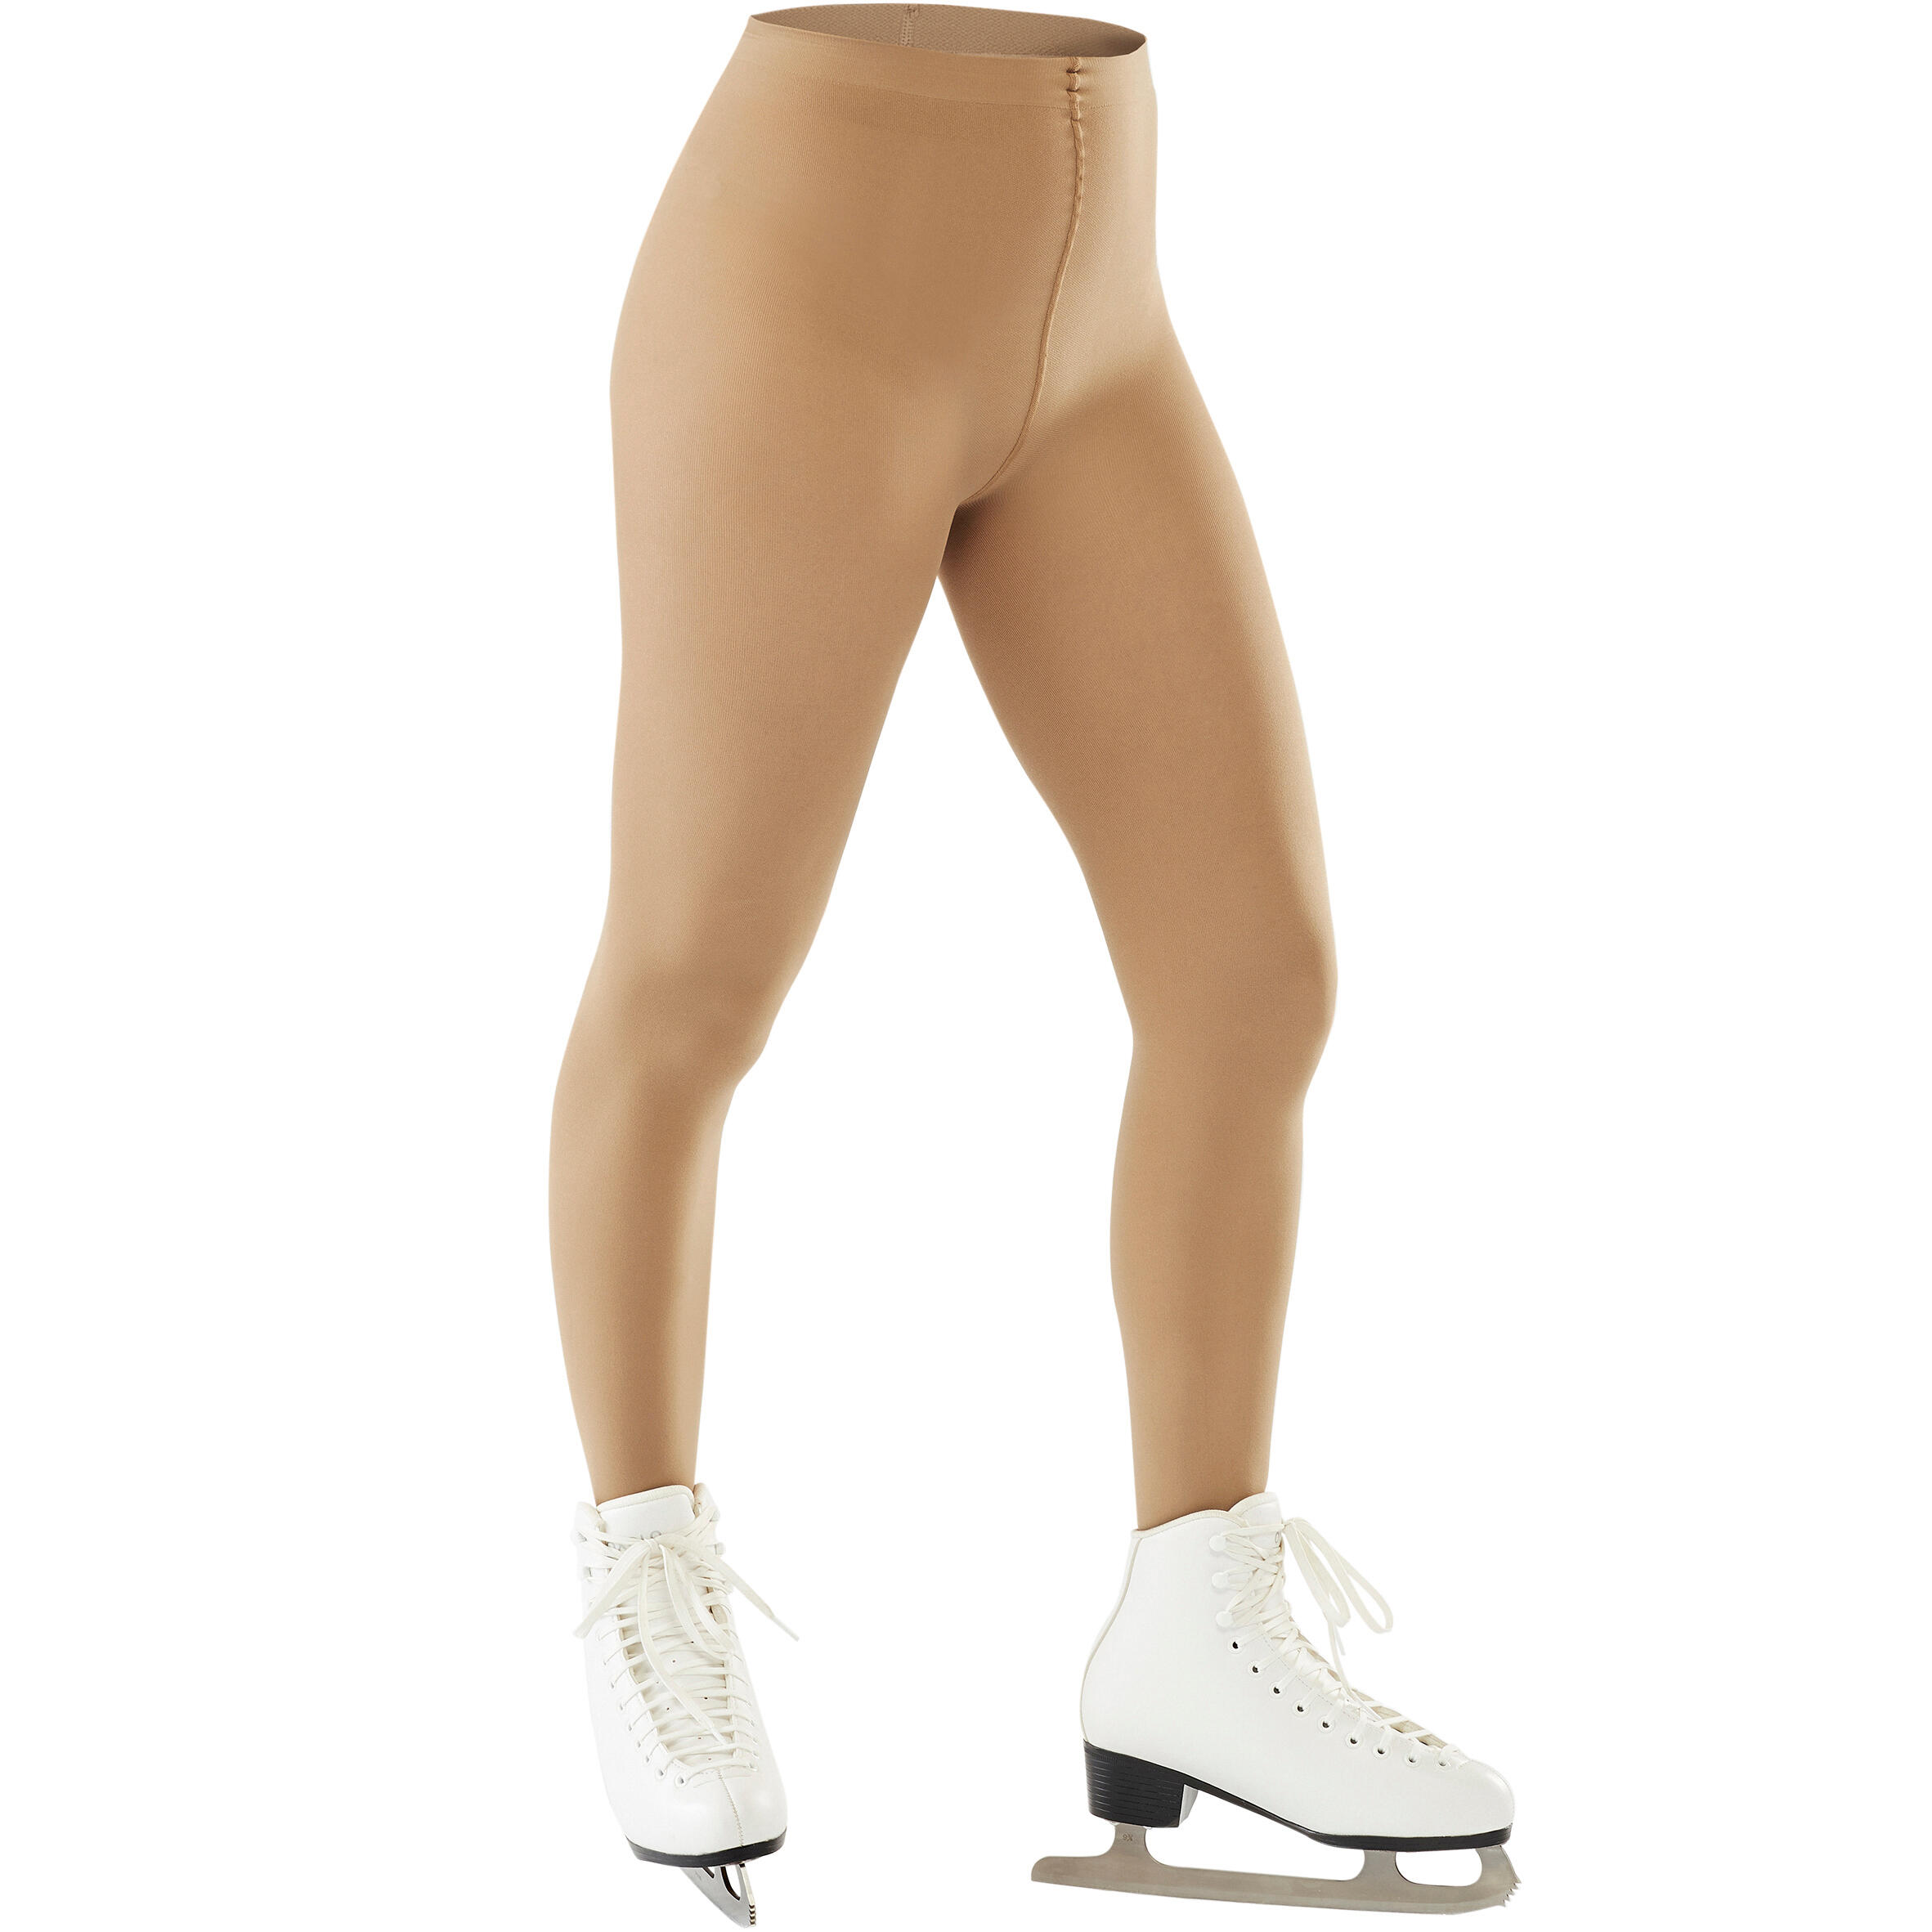 Adult Footed Figure Skating Tights 1/6